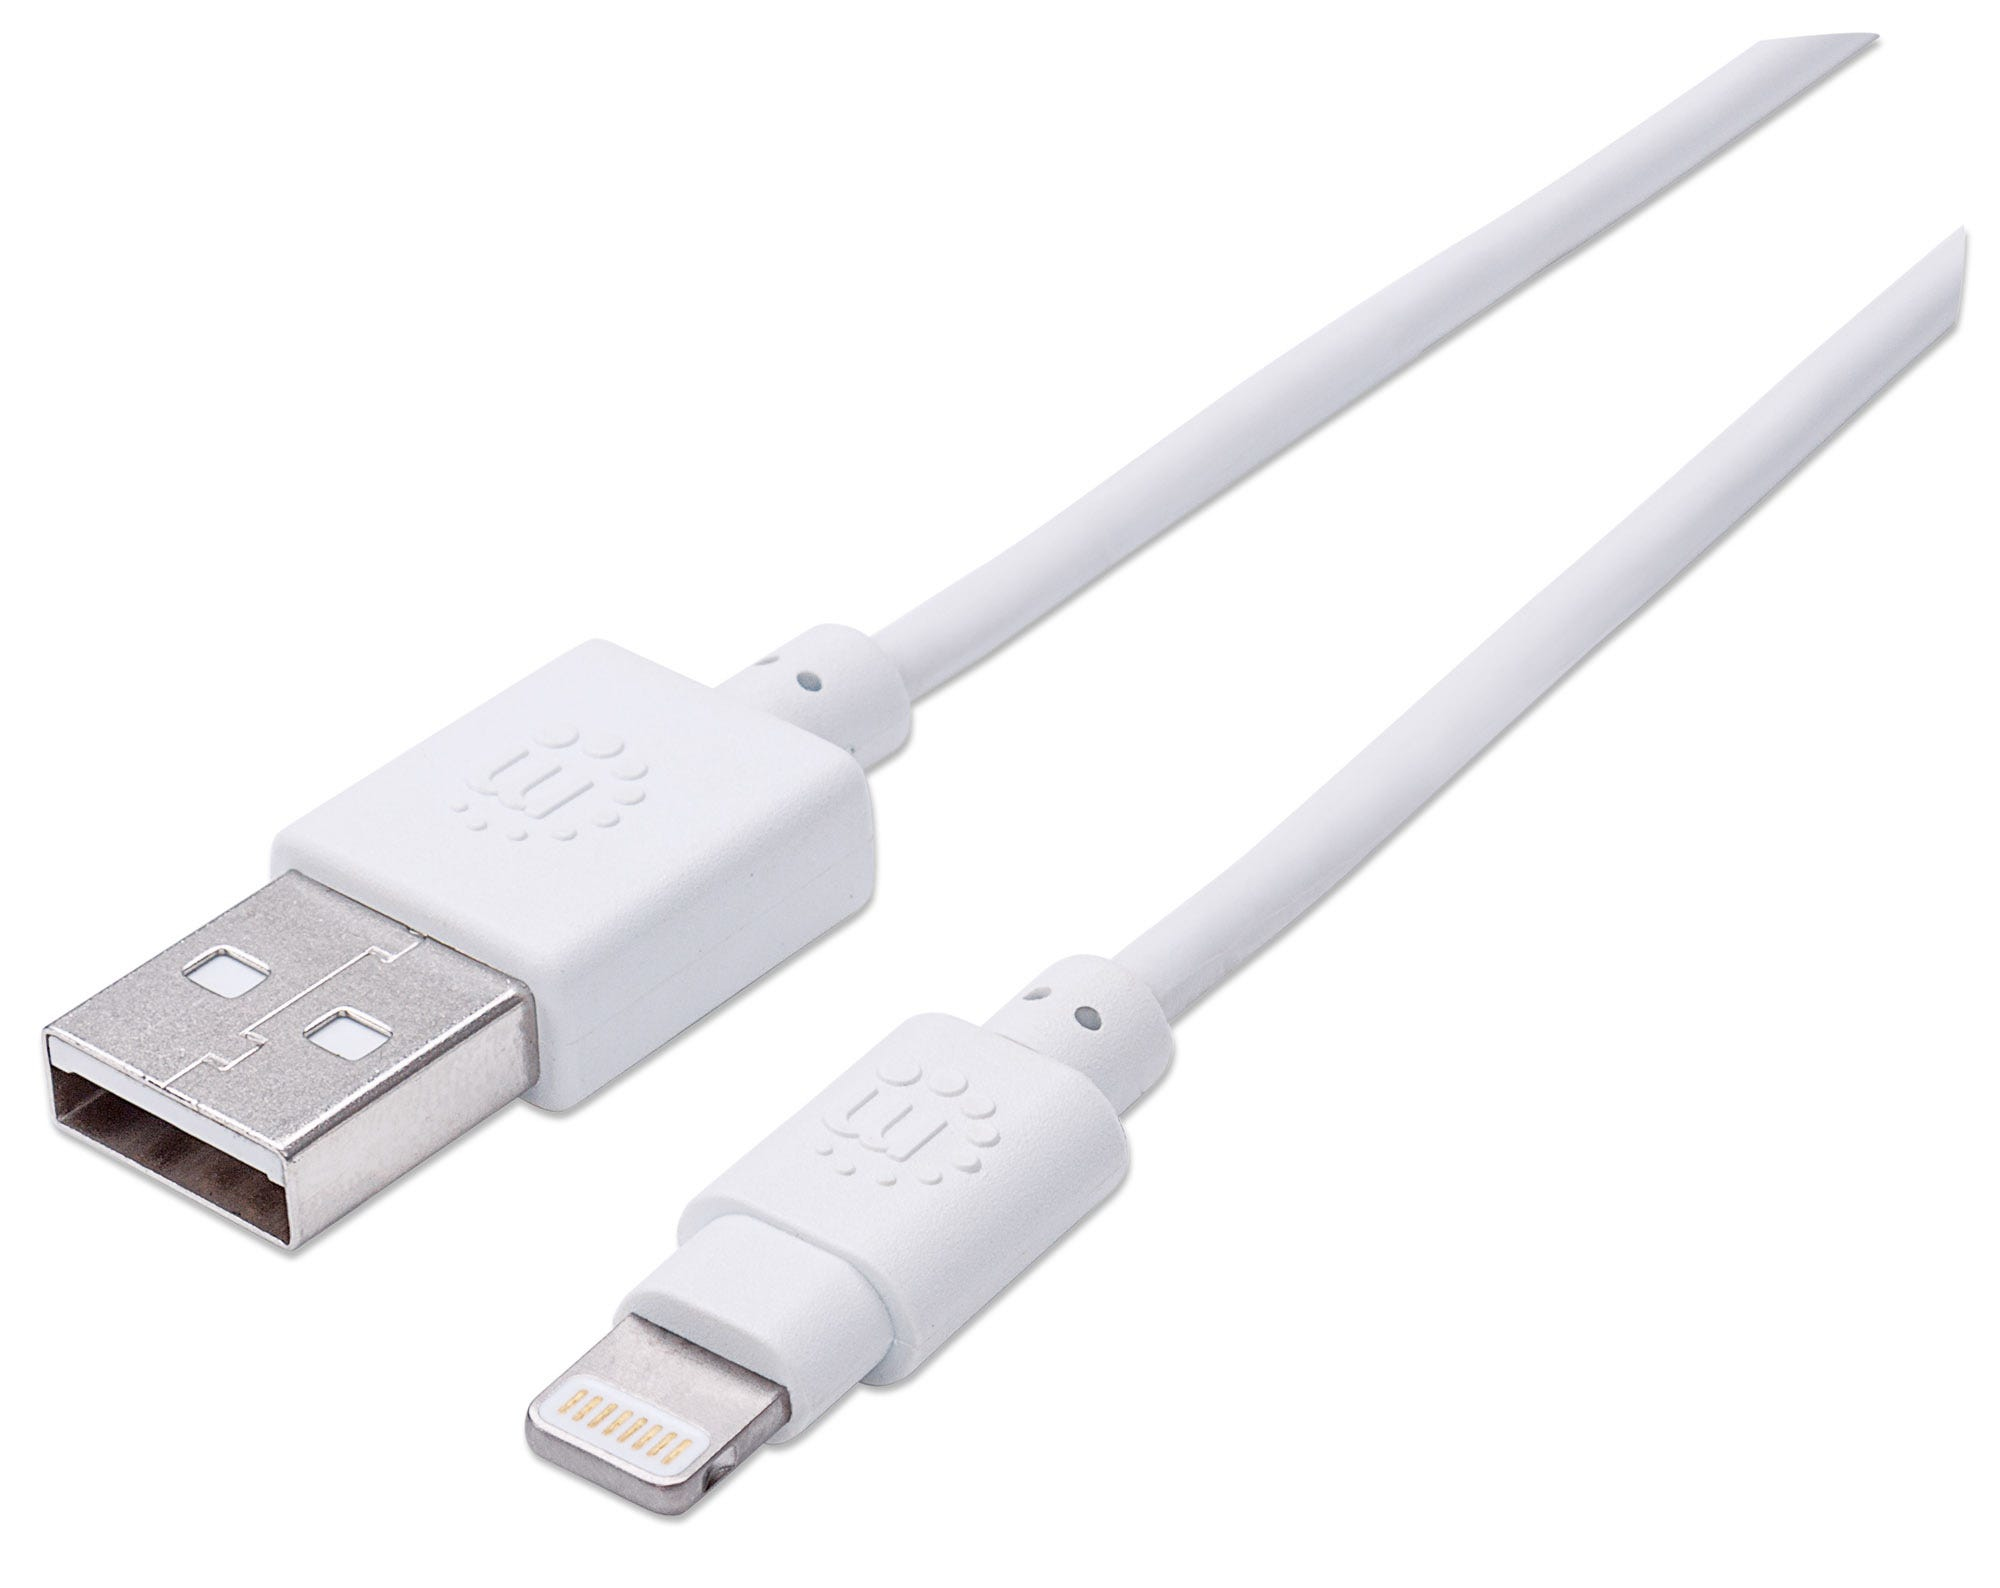 1.5 FT ILYNK LIGHTNING CABLE